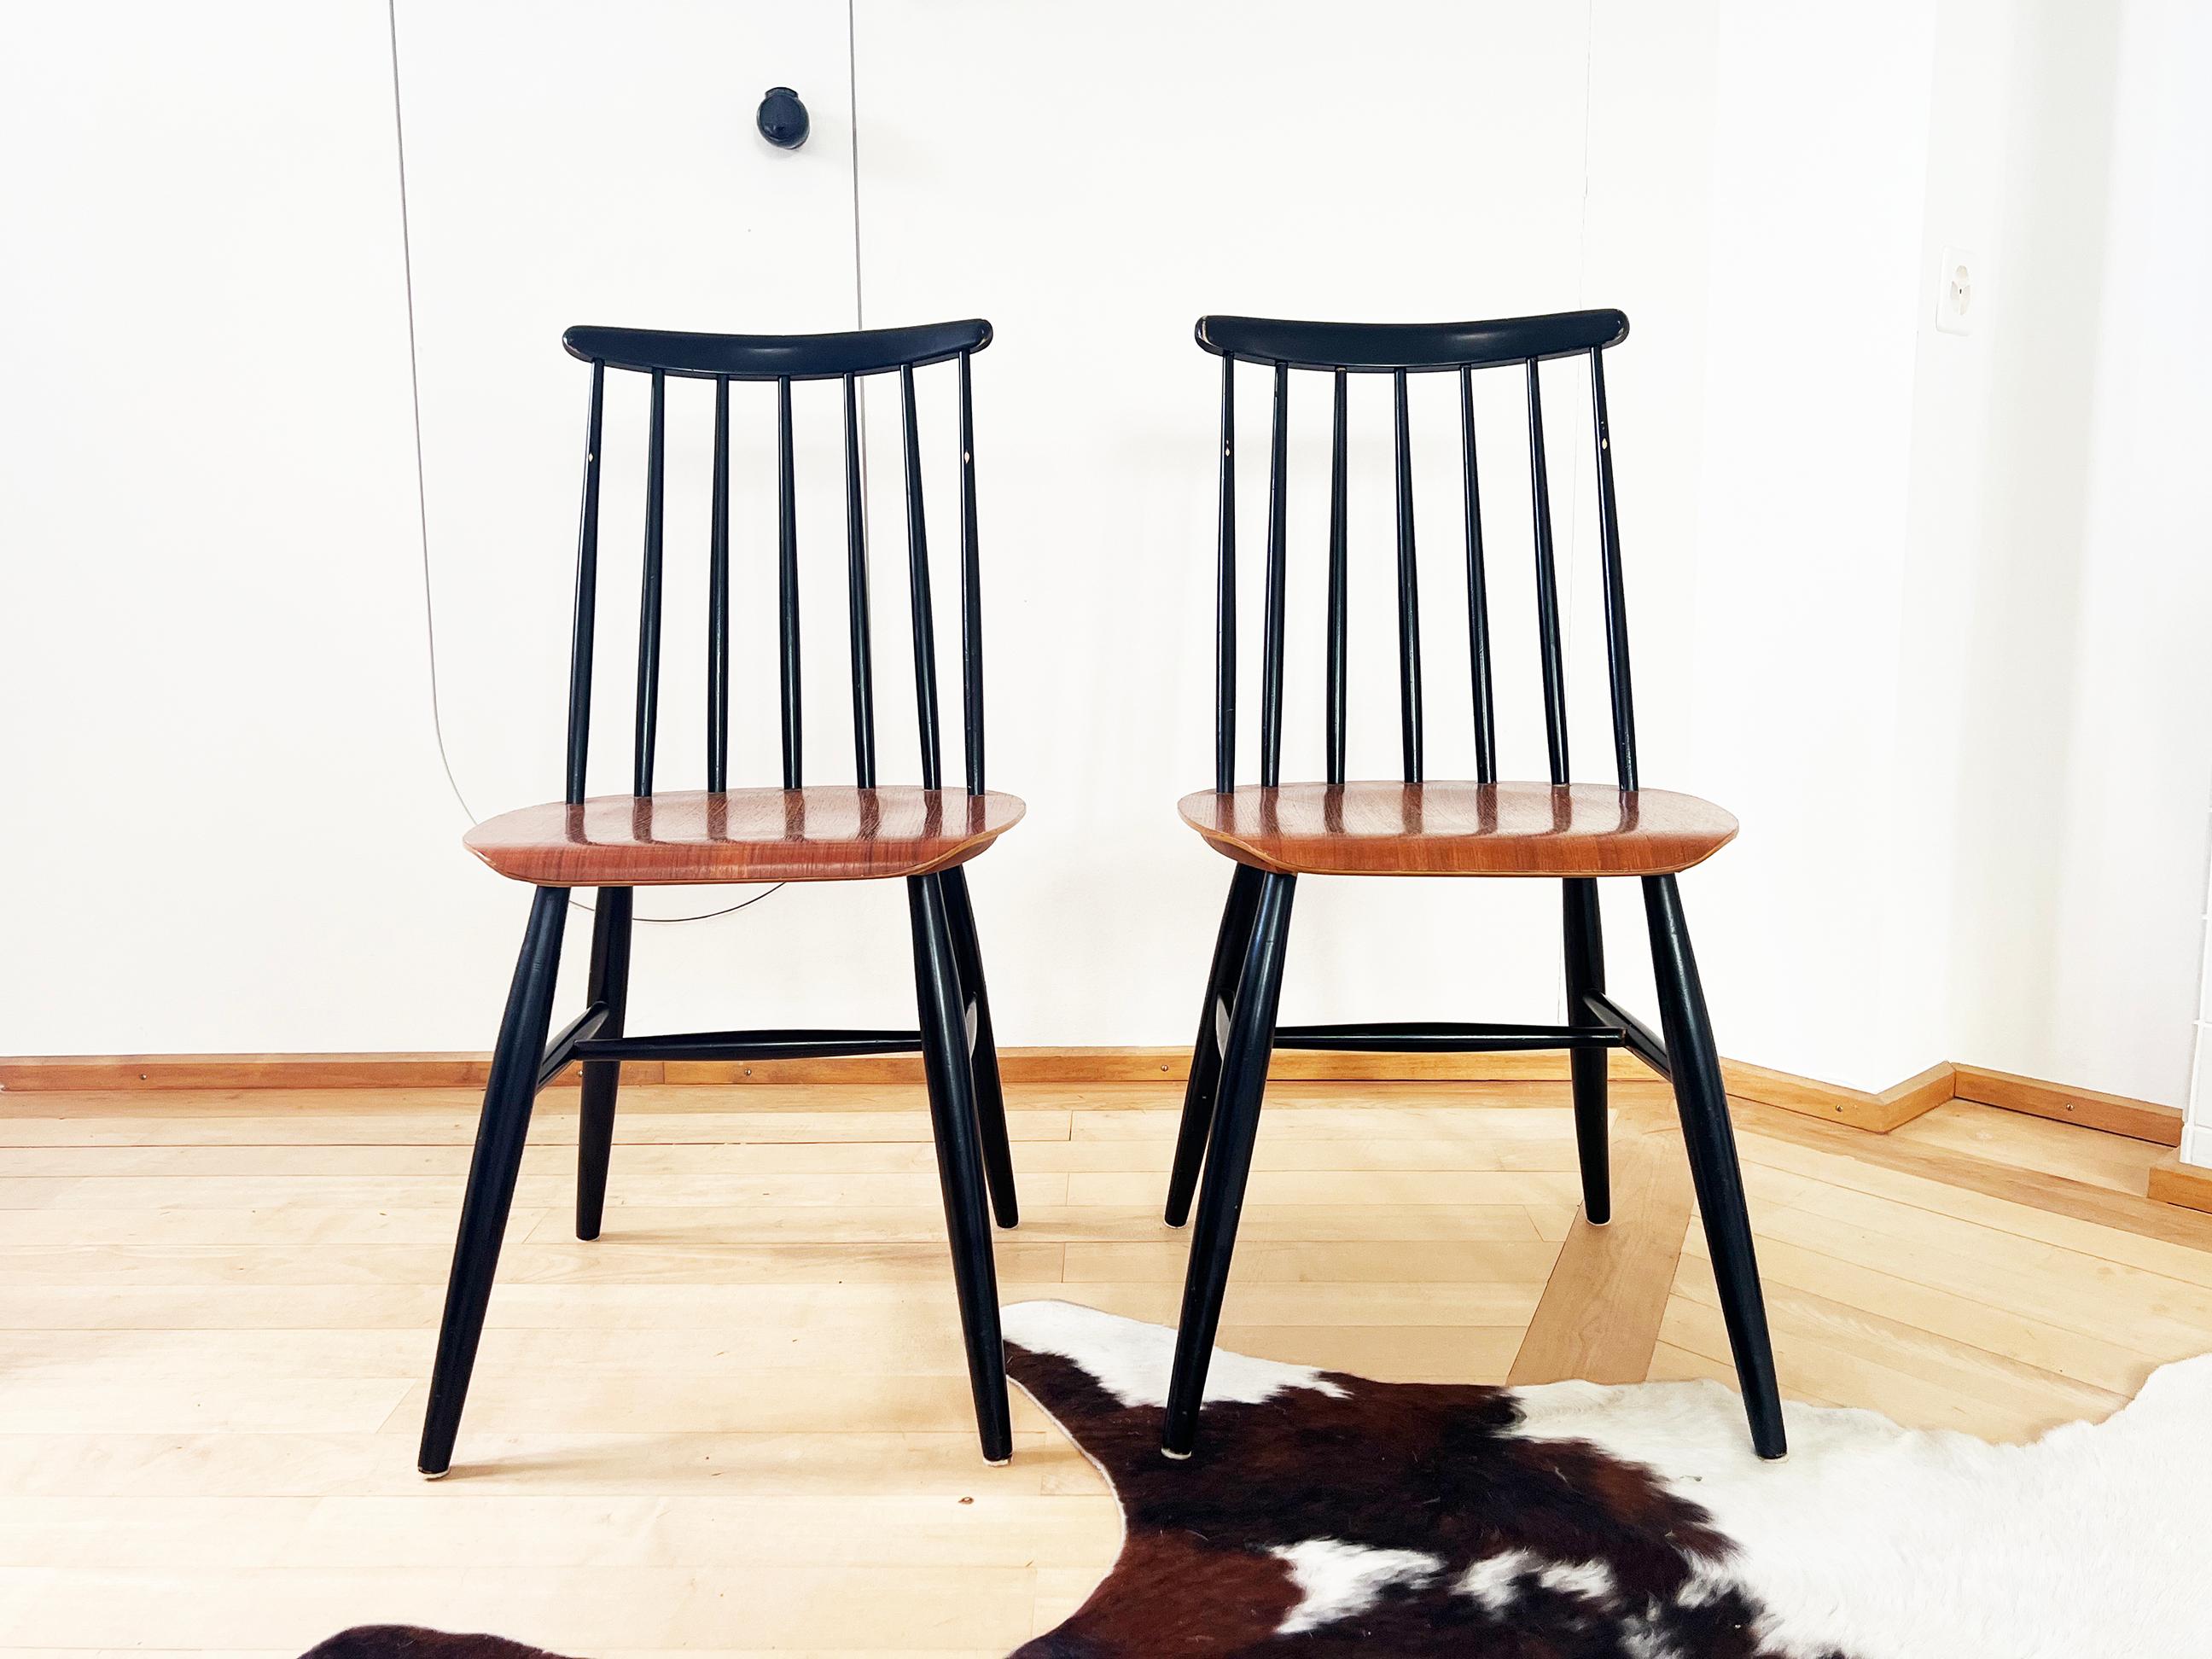 Mid-20th Century Scandinavian Fannet Spindle Chairs by Tapiovaara w/ Curved Teak Seats 60s - 4pcs For Sale